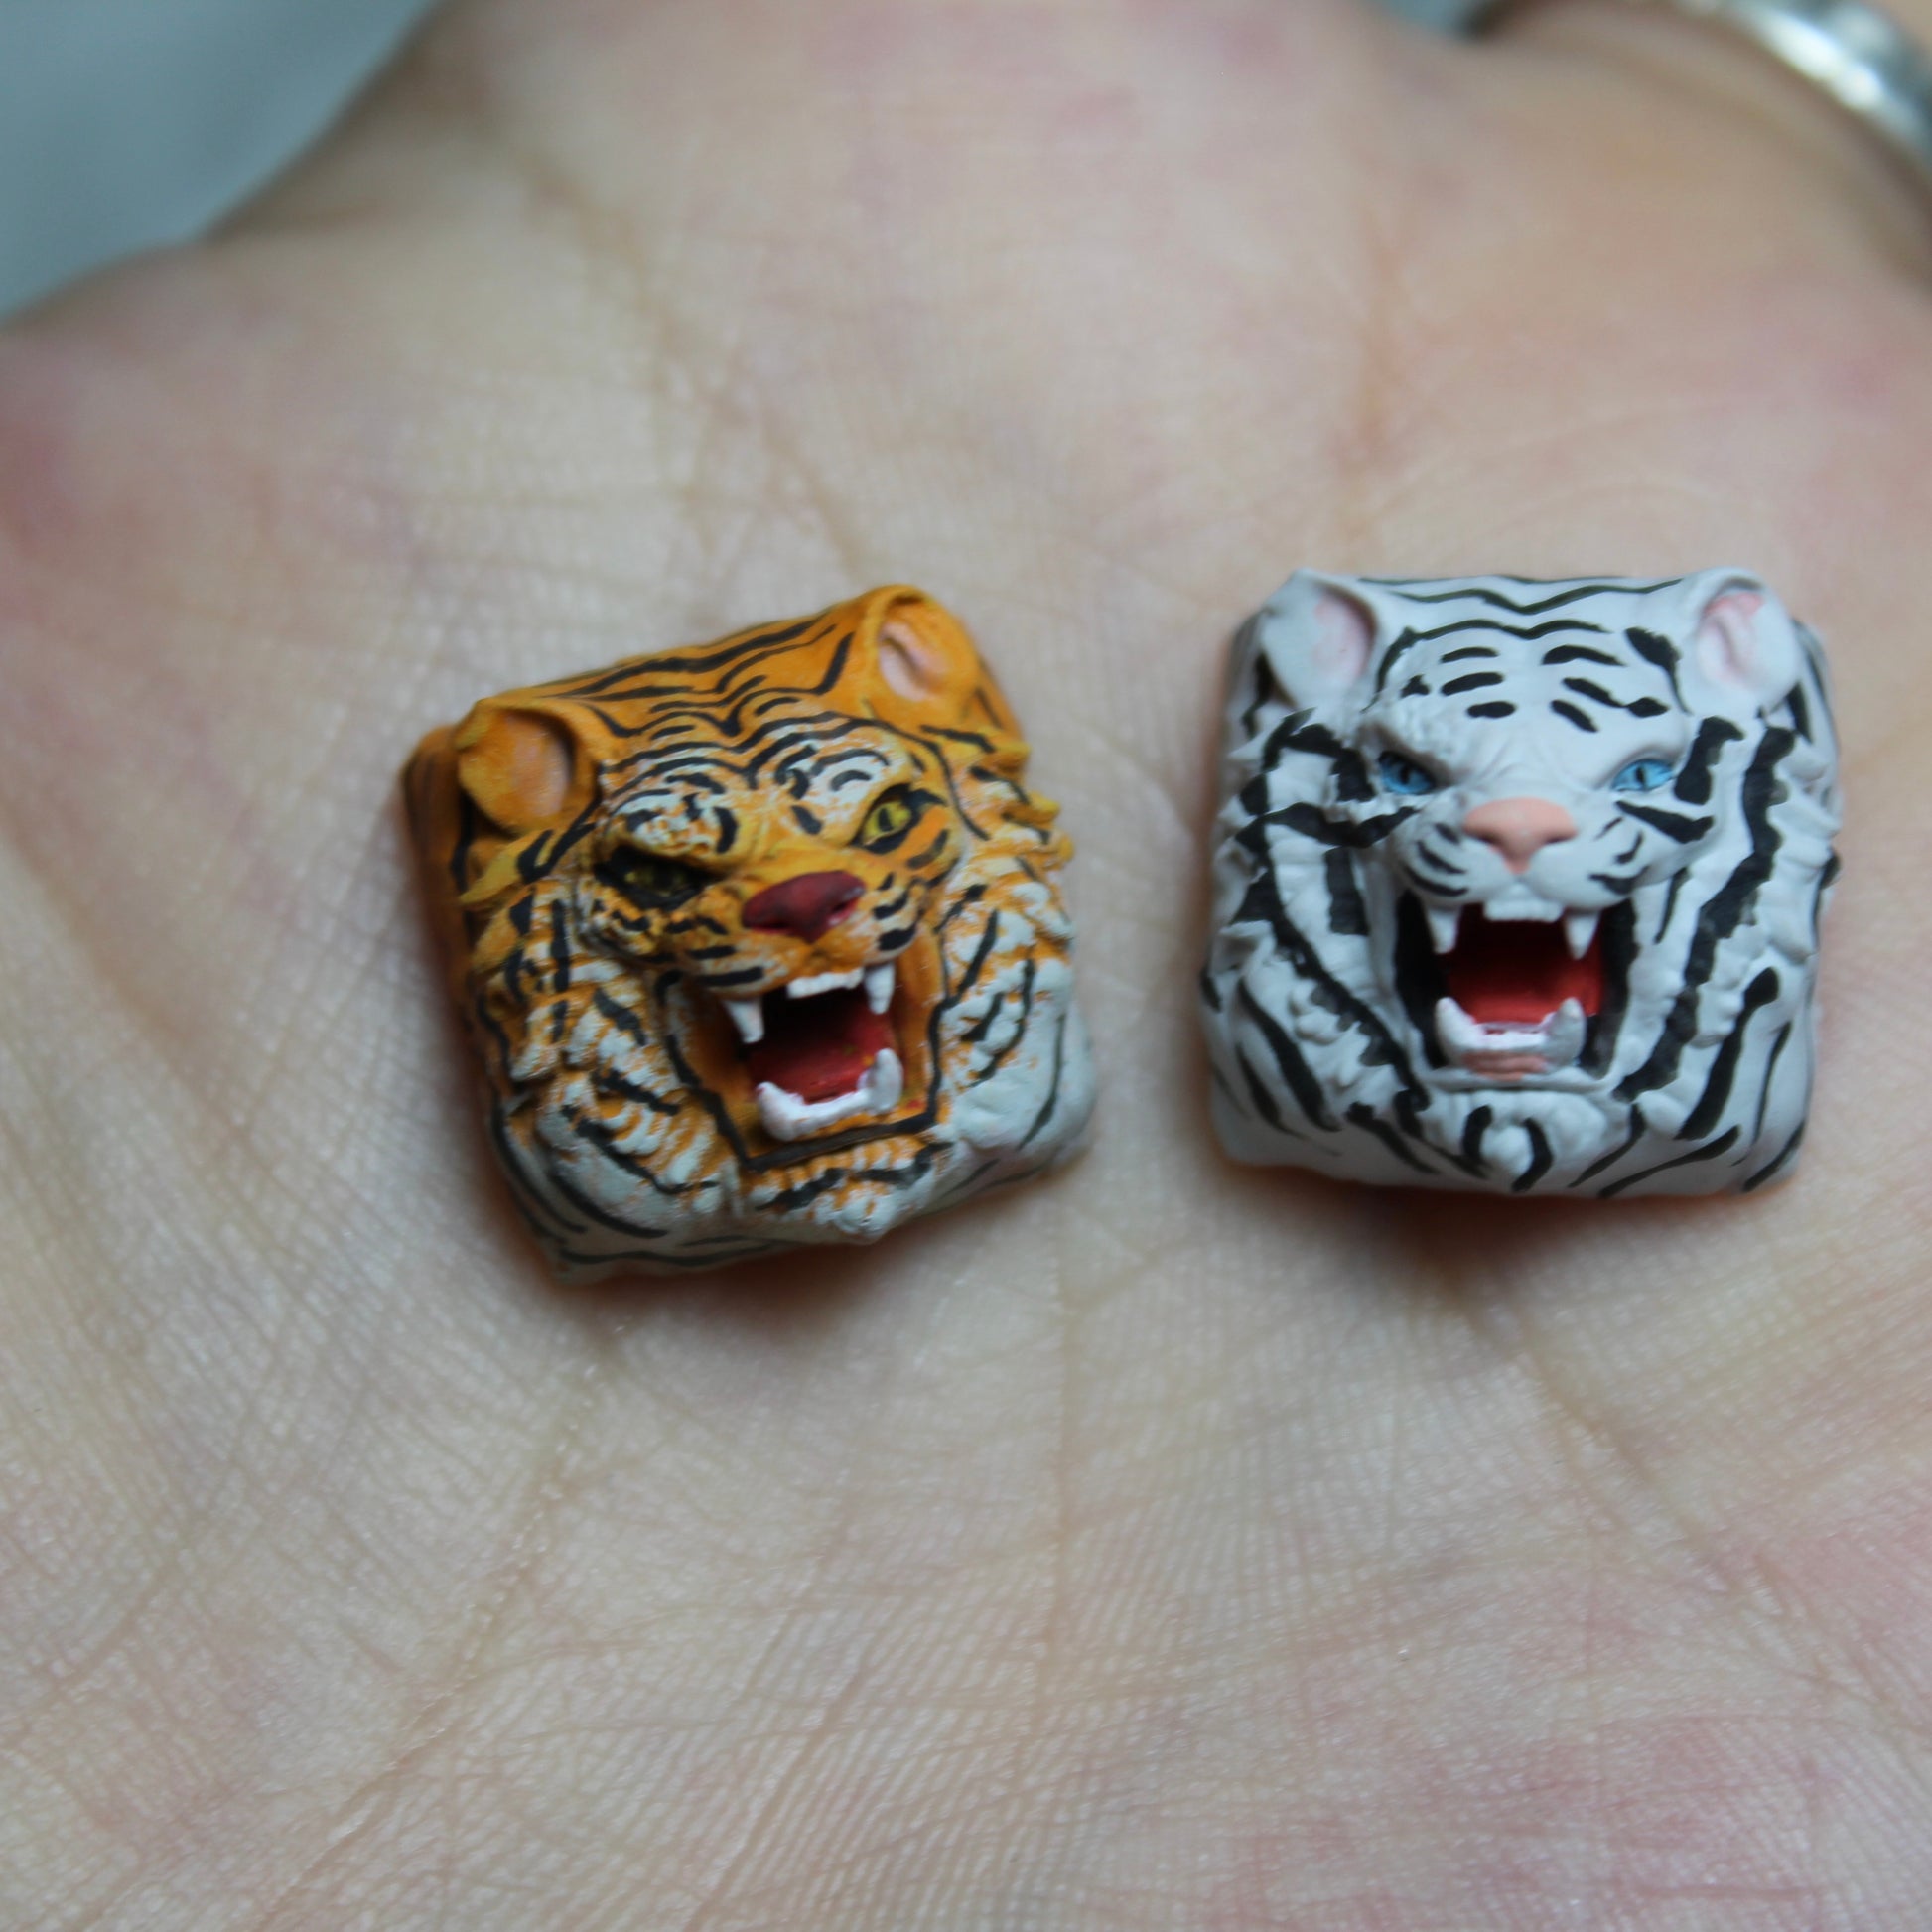 The Angry Tiger Artisan Keycaps Custom Keycap